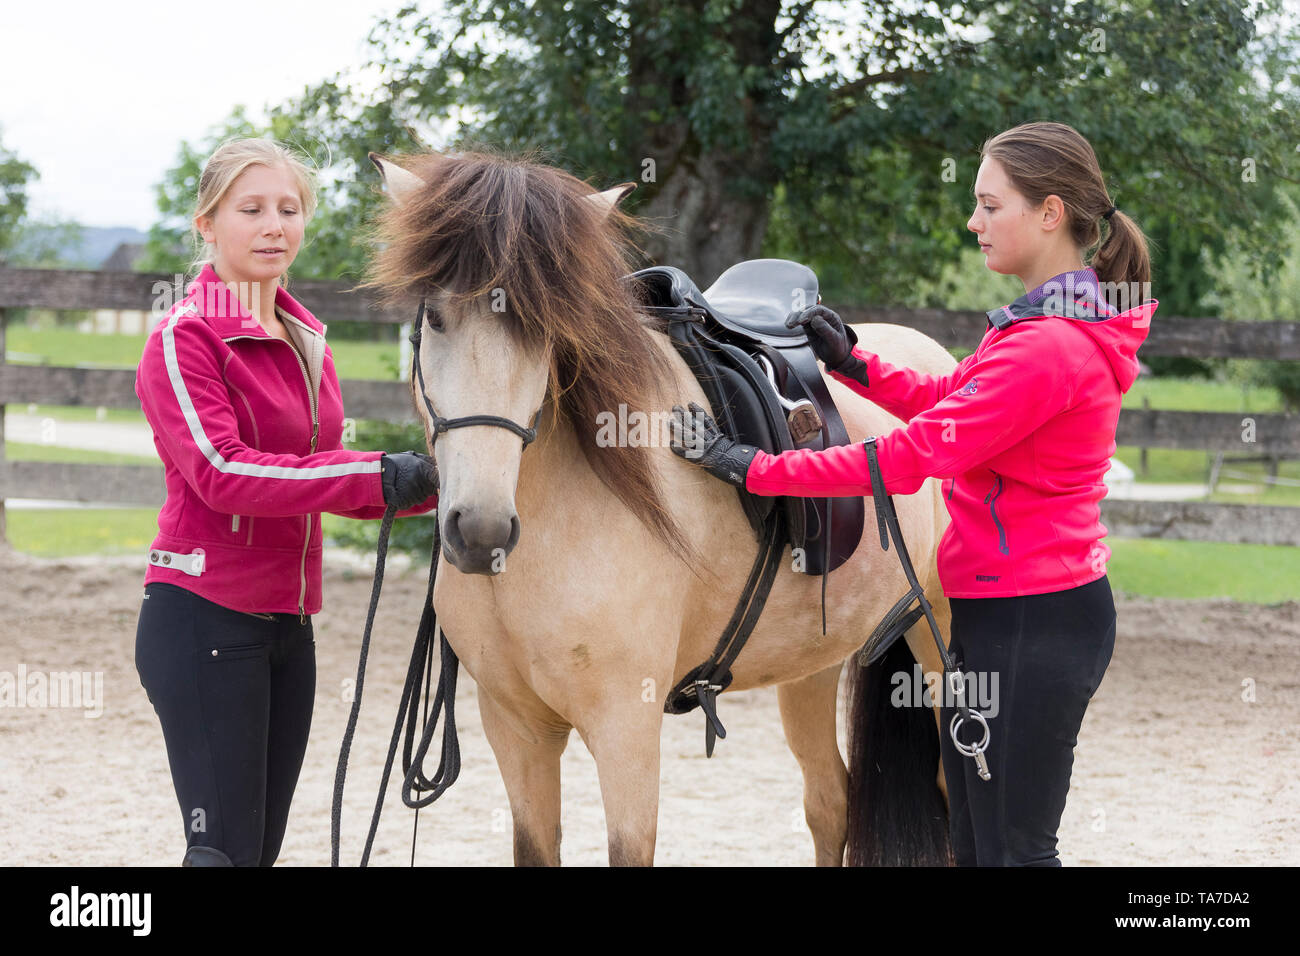 Icelandic Horse. Juvenile dun horse being trained to accept a saddle. Austria Stock Photo